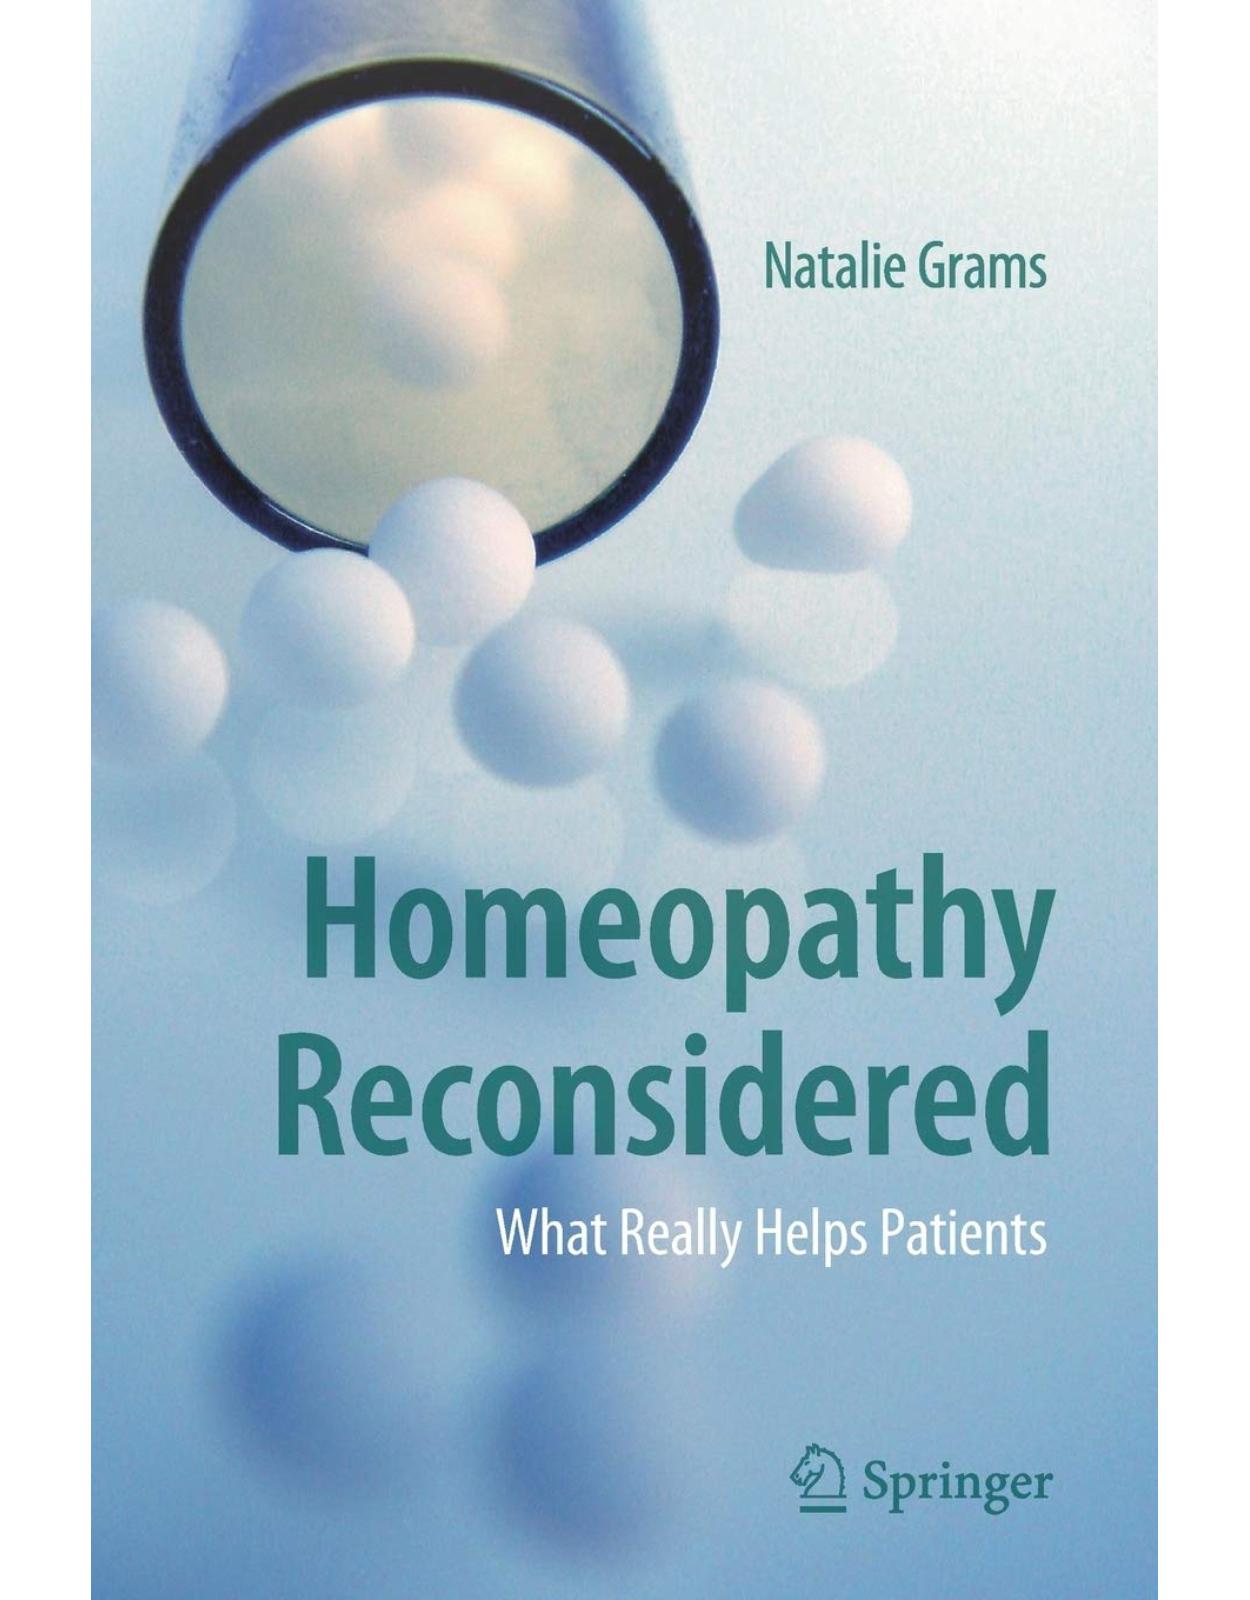 Homeopathy Reconsidered: What Really Helps Patients